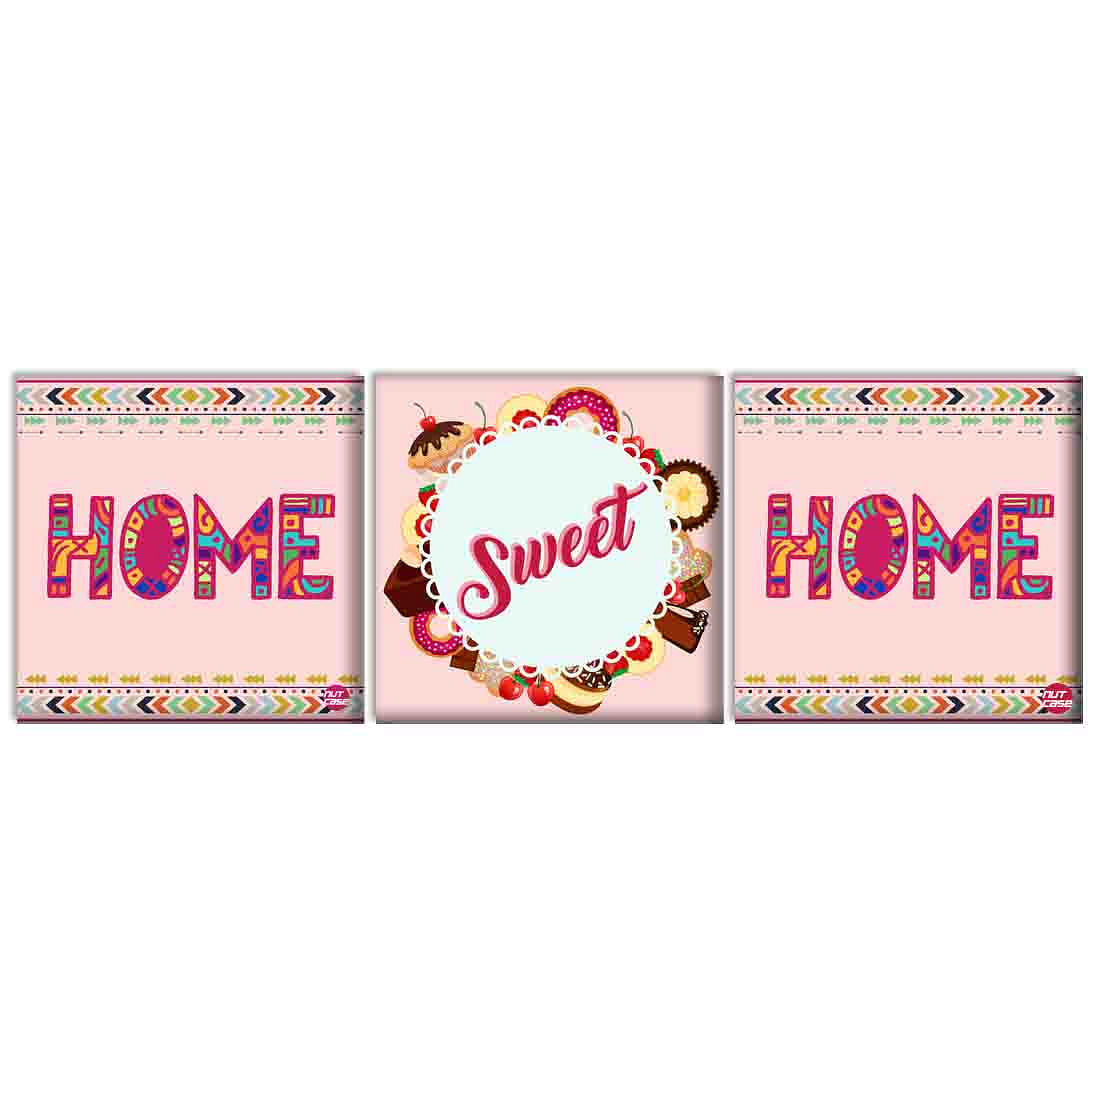 Wall Art Decor Hanging Panels Set Of 3 -Home Sweet Home Pink Nutcase